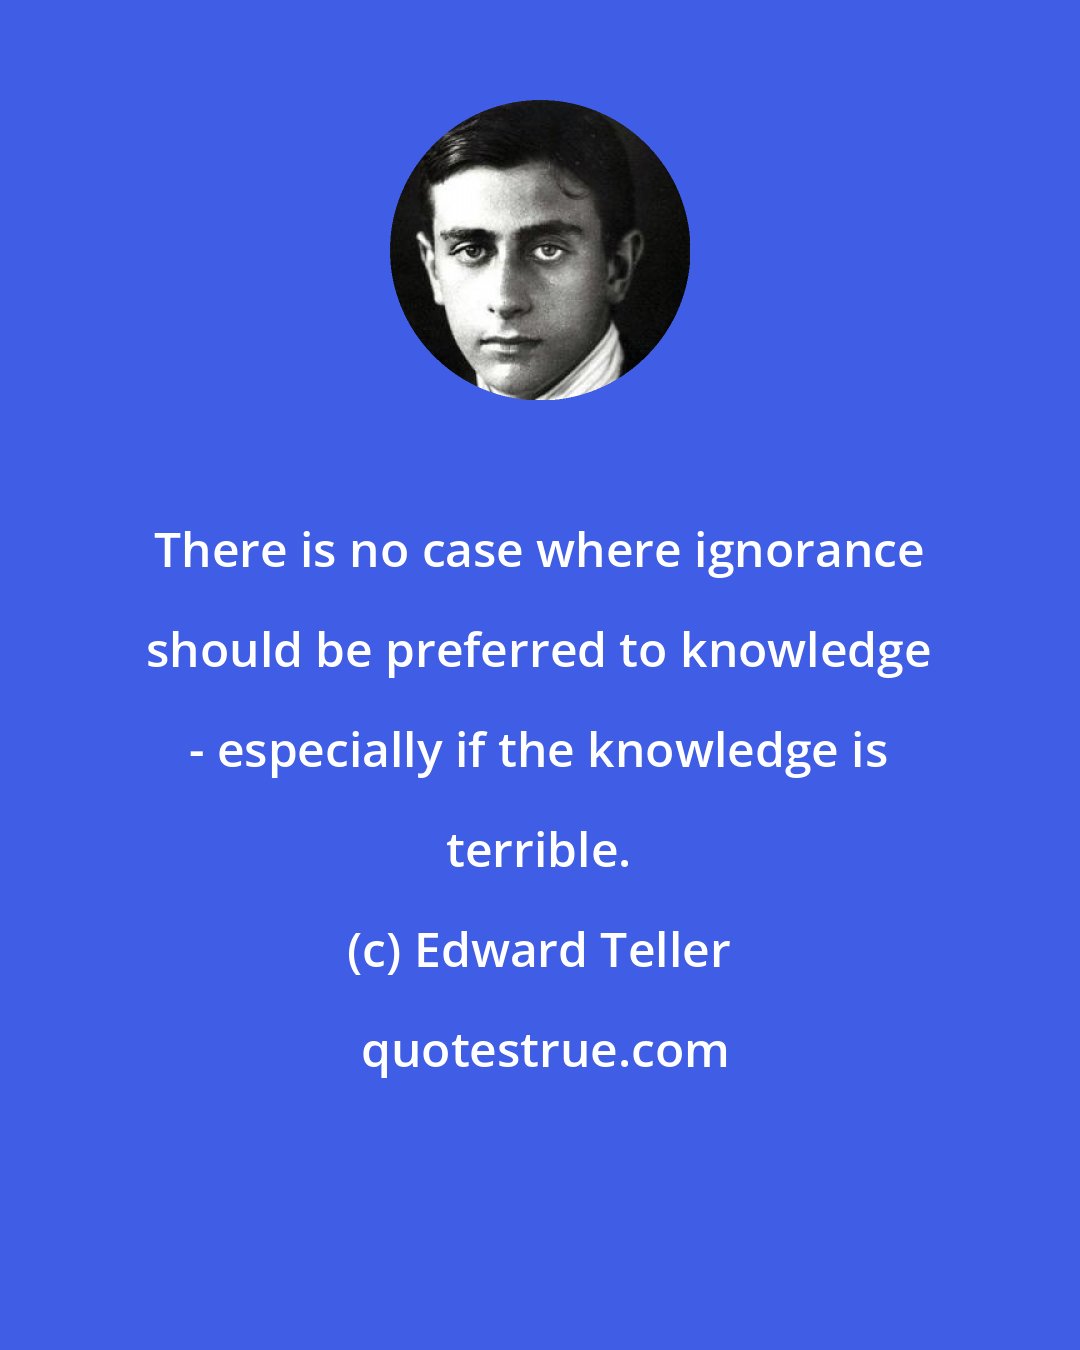 Edward Teller: There is no case where ignorance should be preferred to knowledge - especially if the knowledge is terrible.